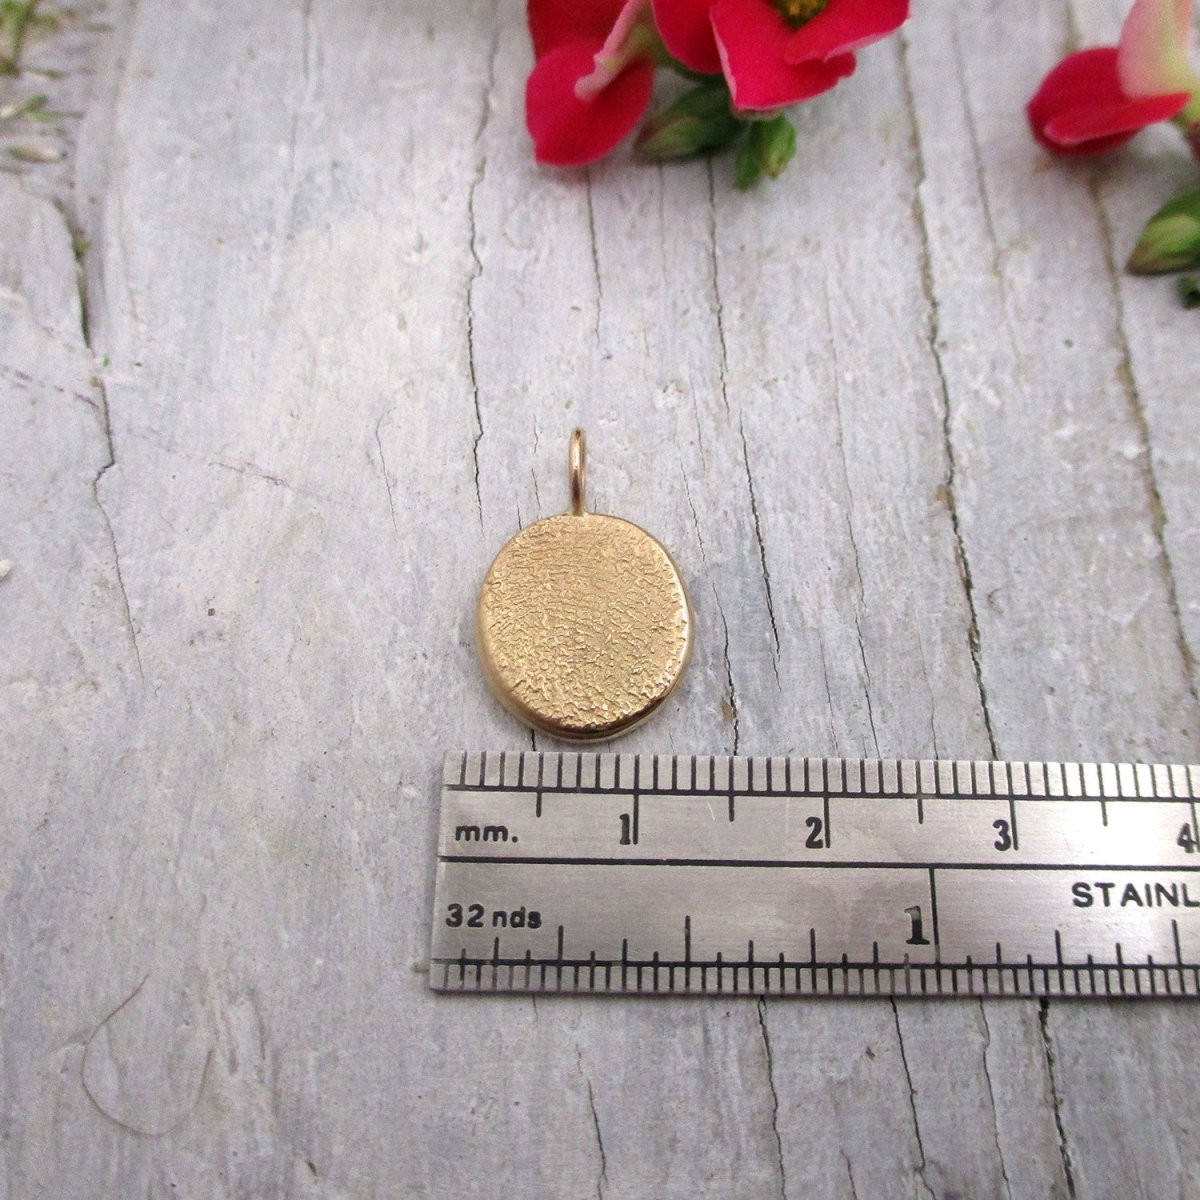 Small Size Solid 14k Gold Organic Wedge Style Fingerprint Pendant from Digital Image - Luxe Design Jewellery